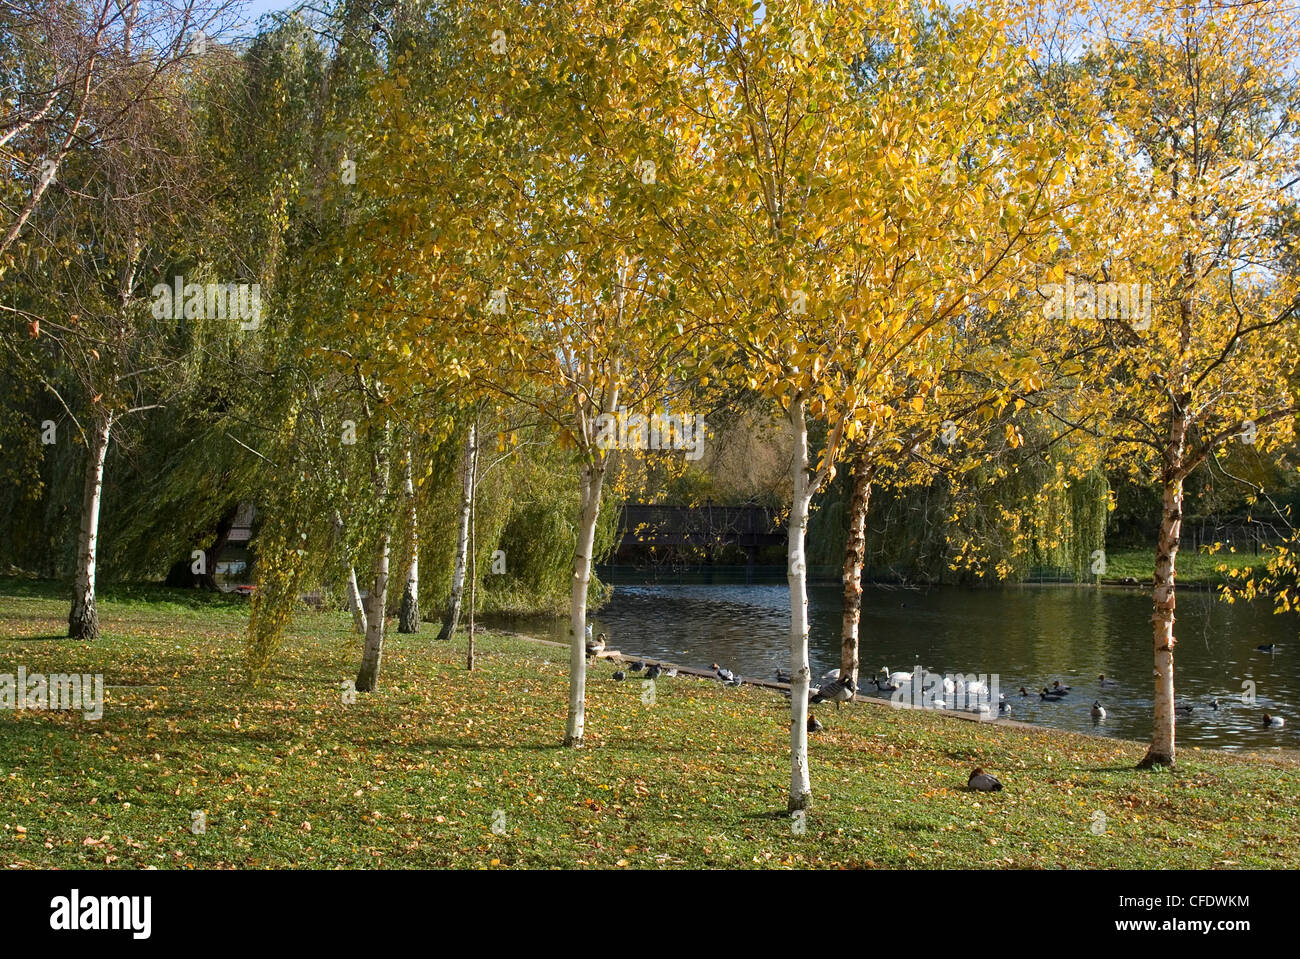 Autumn colours by the pond in Regent's Park, London NW1, England, United Kingdom, Europe Stock Photo